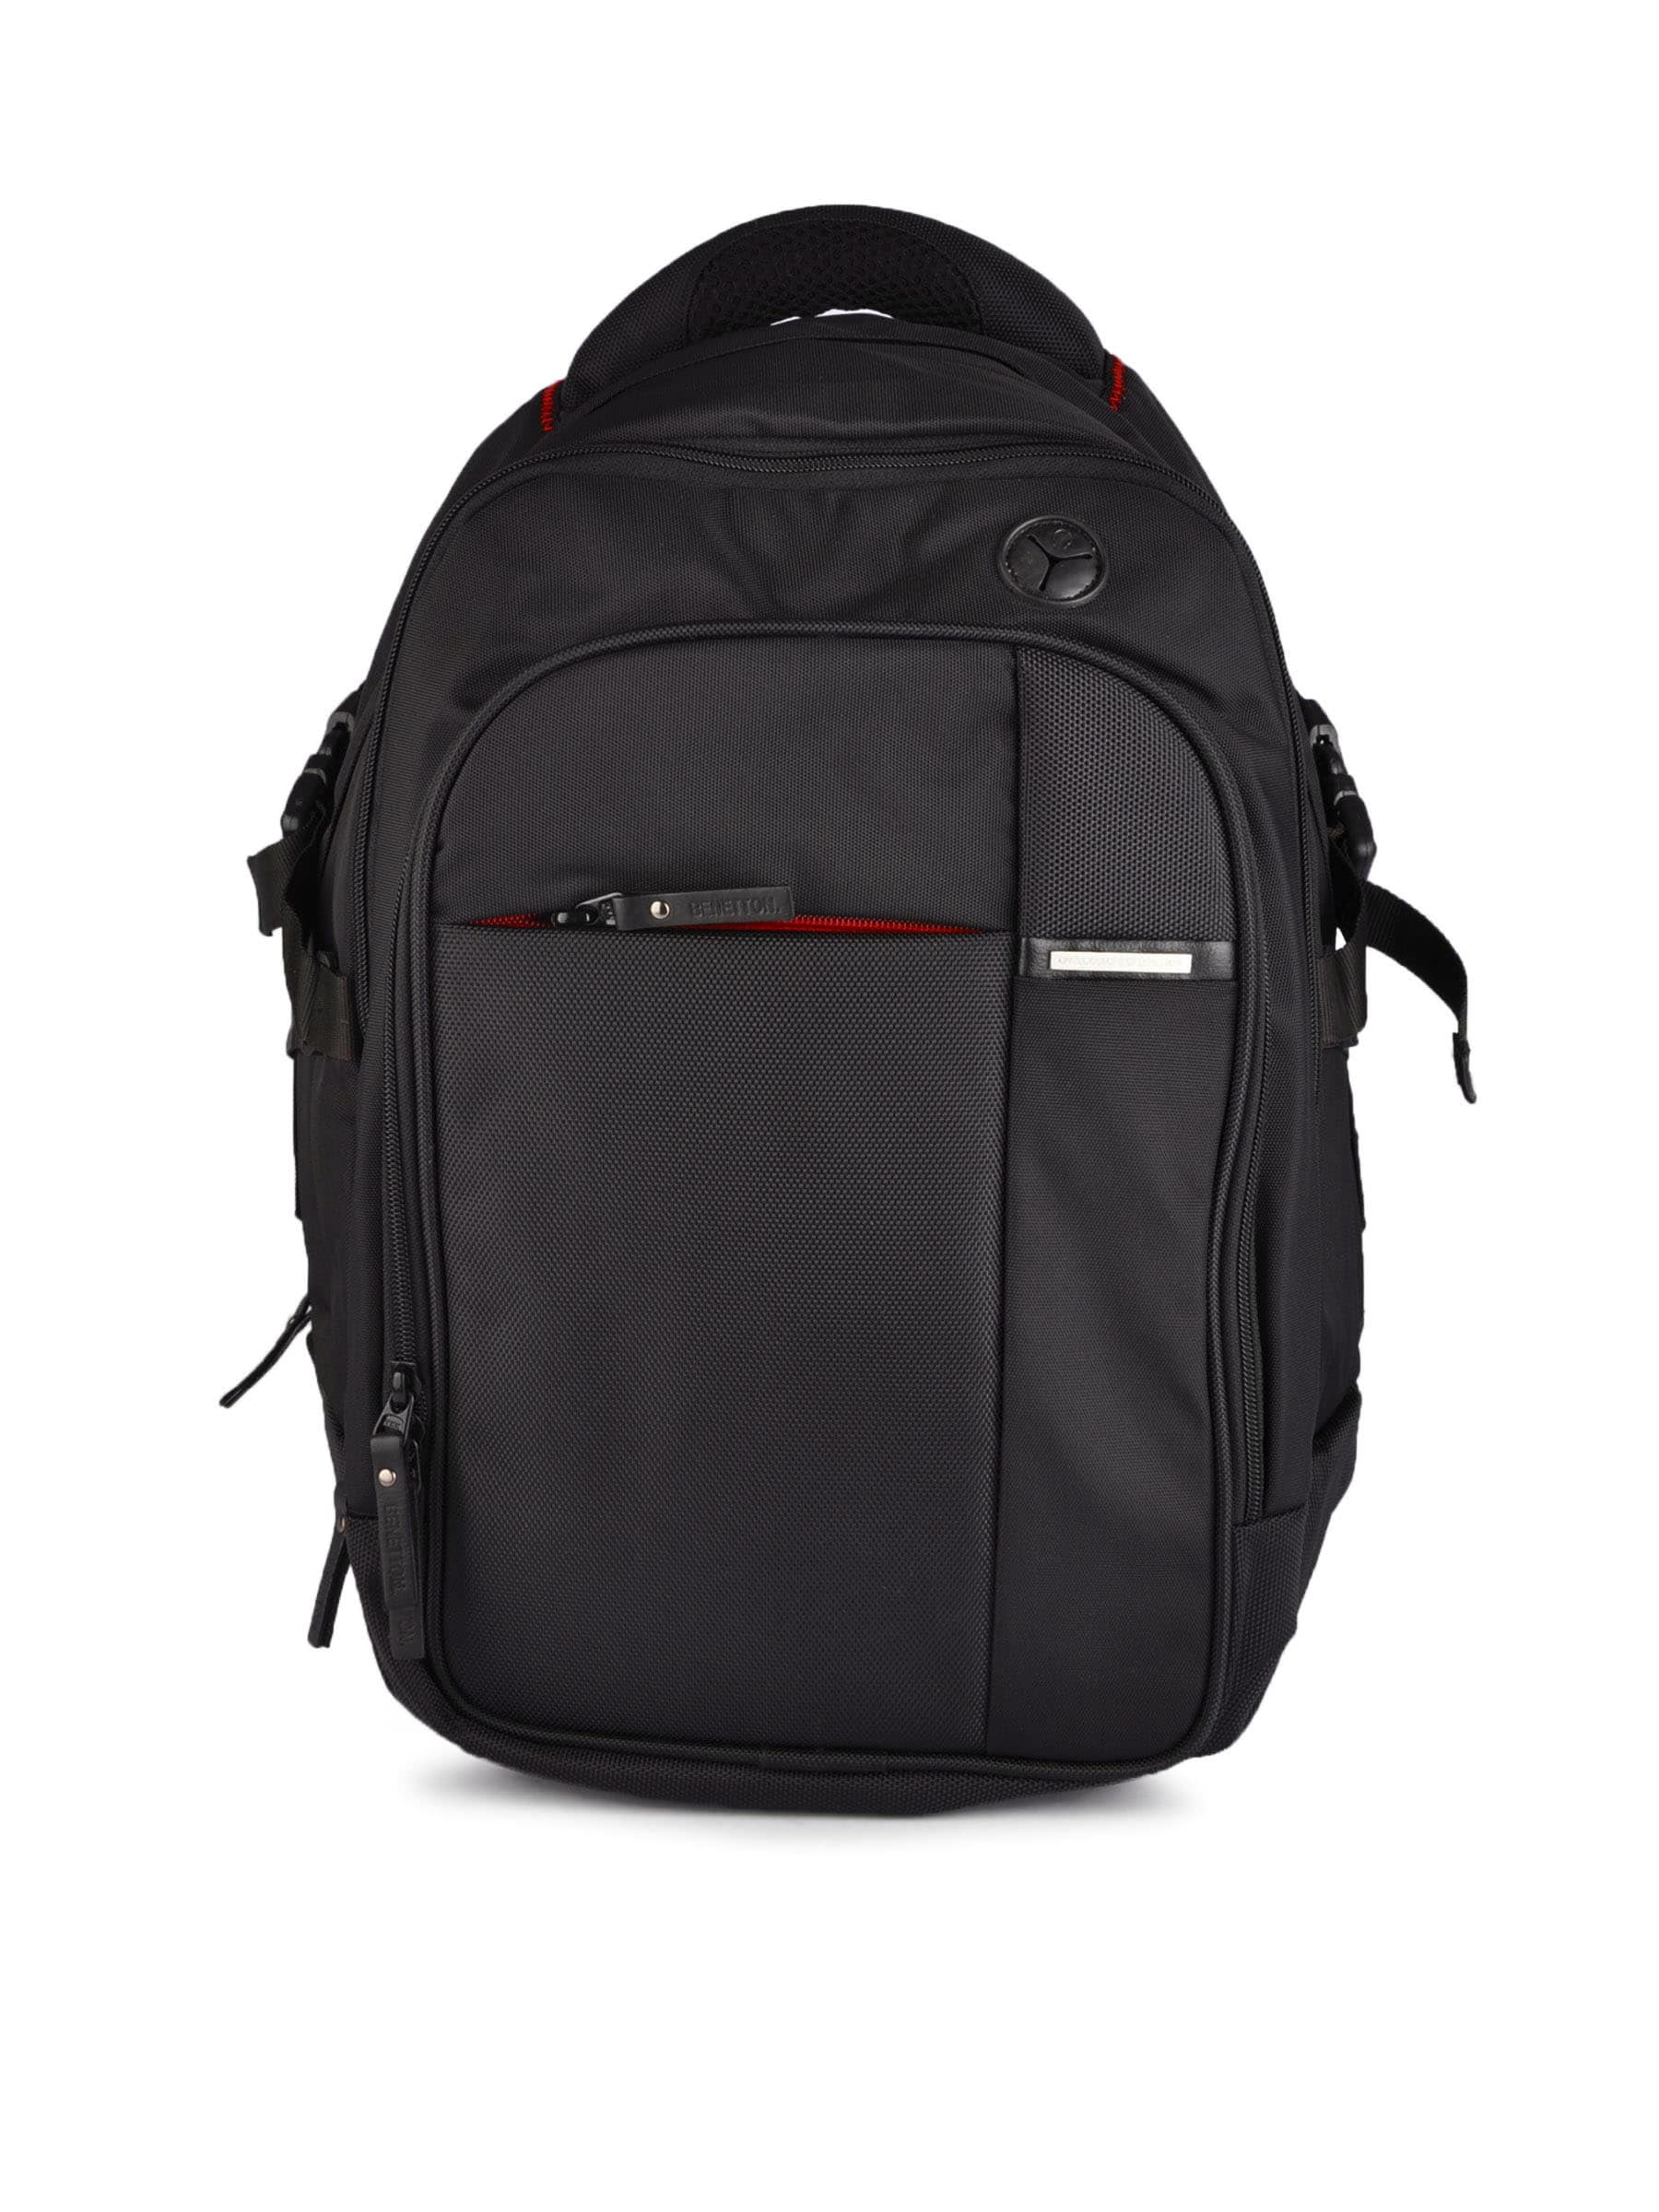 United Colors of Benetton Black  Backpack